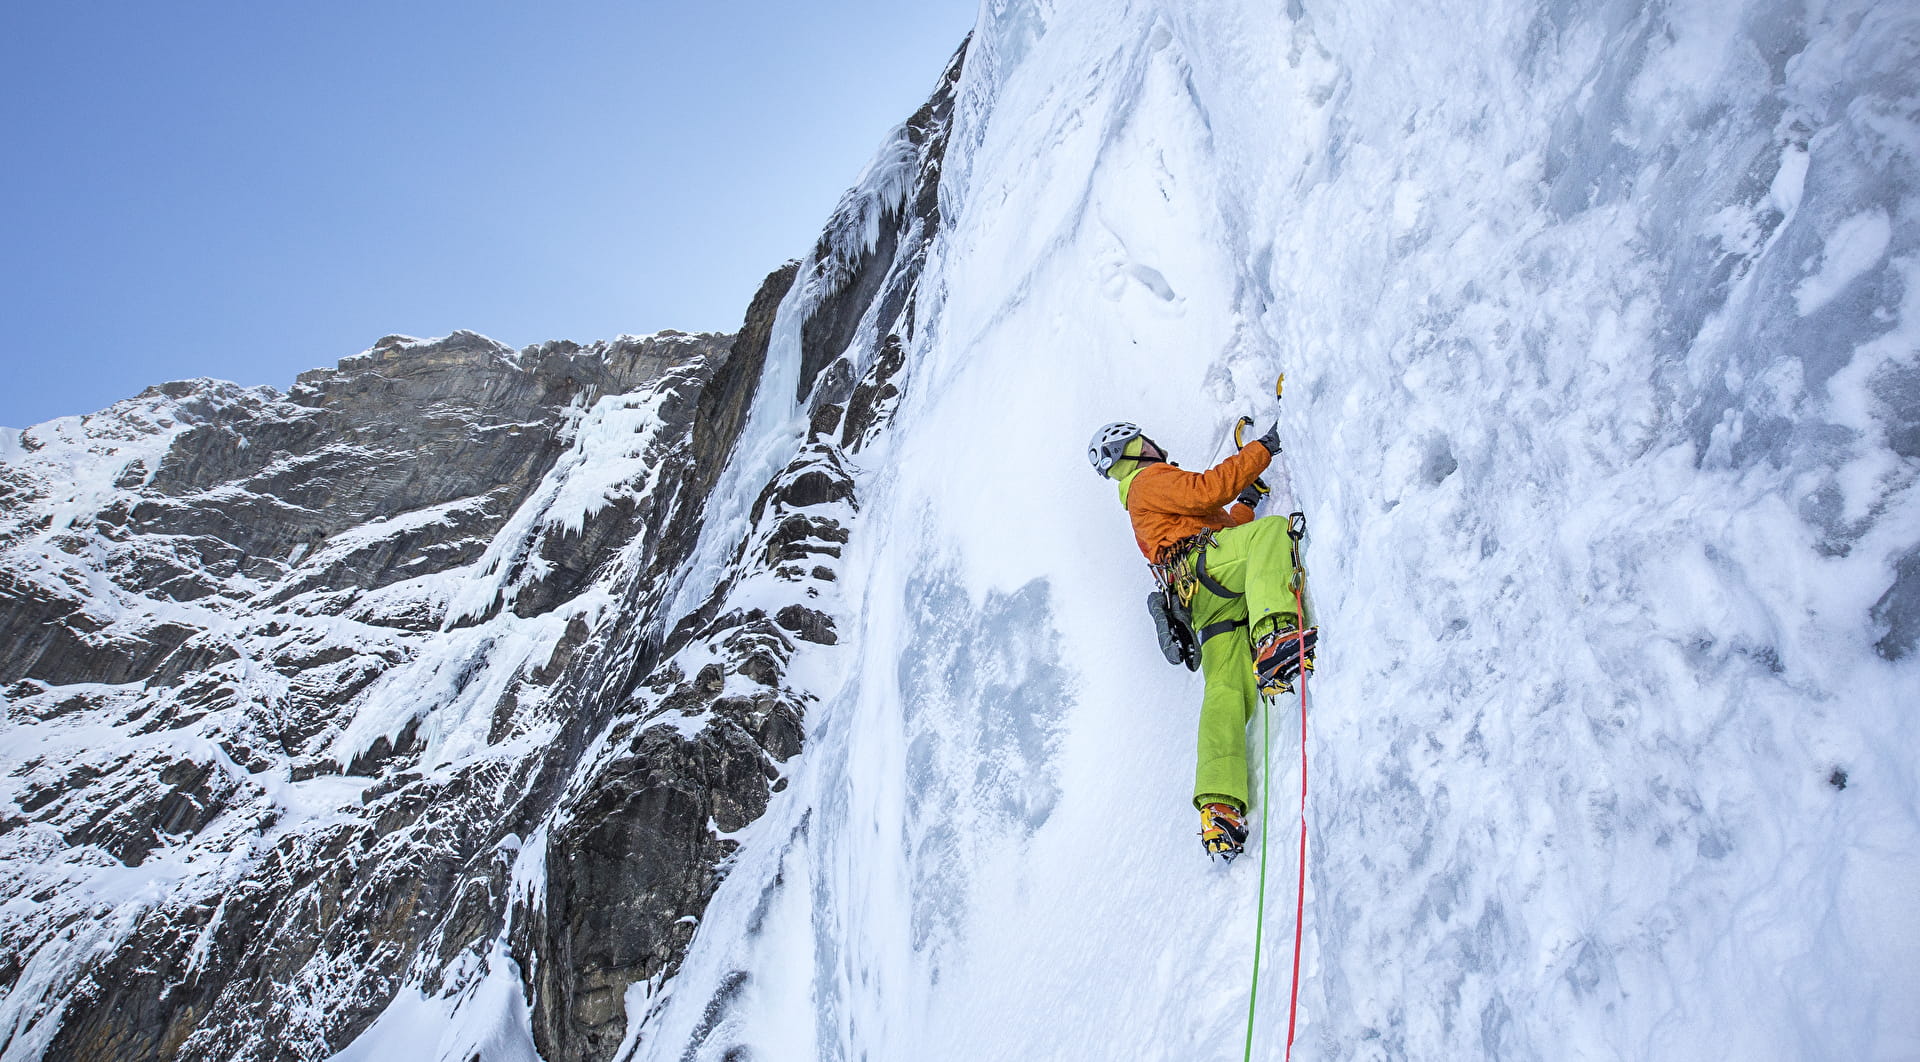 Ice climbing in the Pyrenees, in the heart of the Cirque de Gavarnie